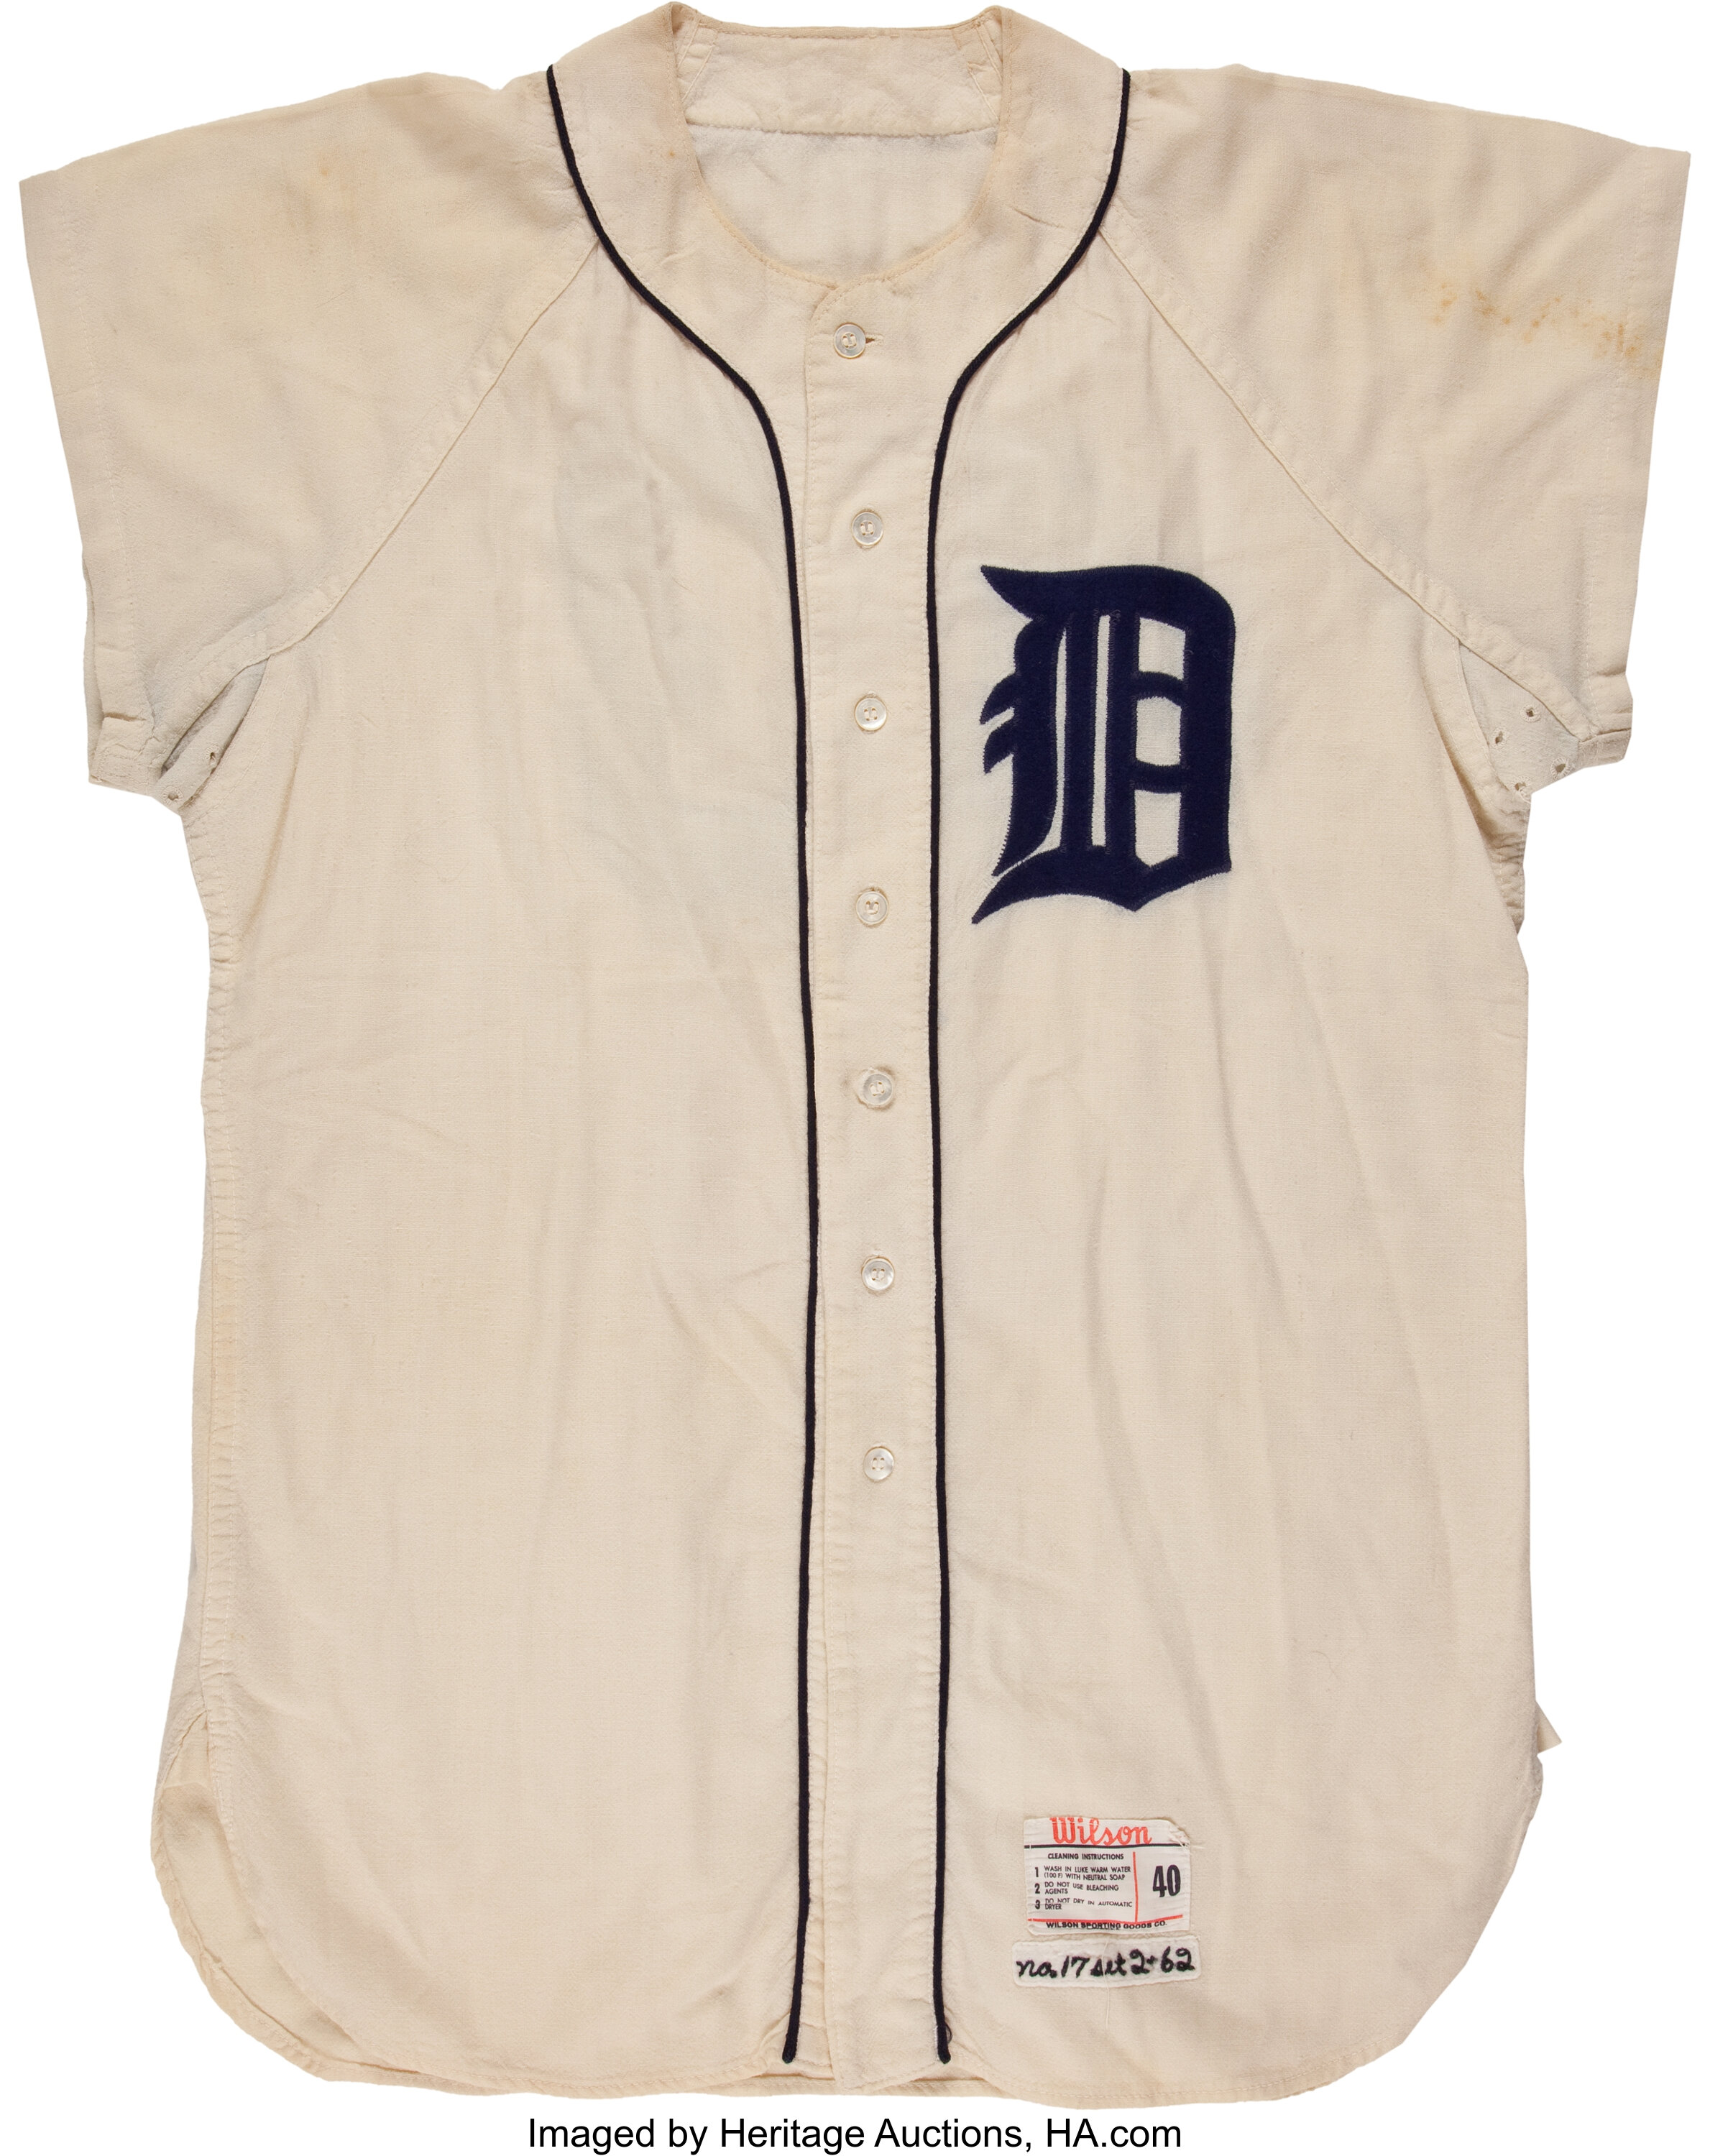 Bidding open on Tigers game-worn jersey auction